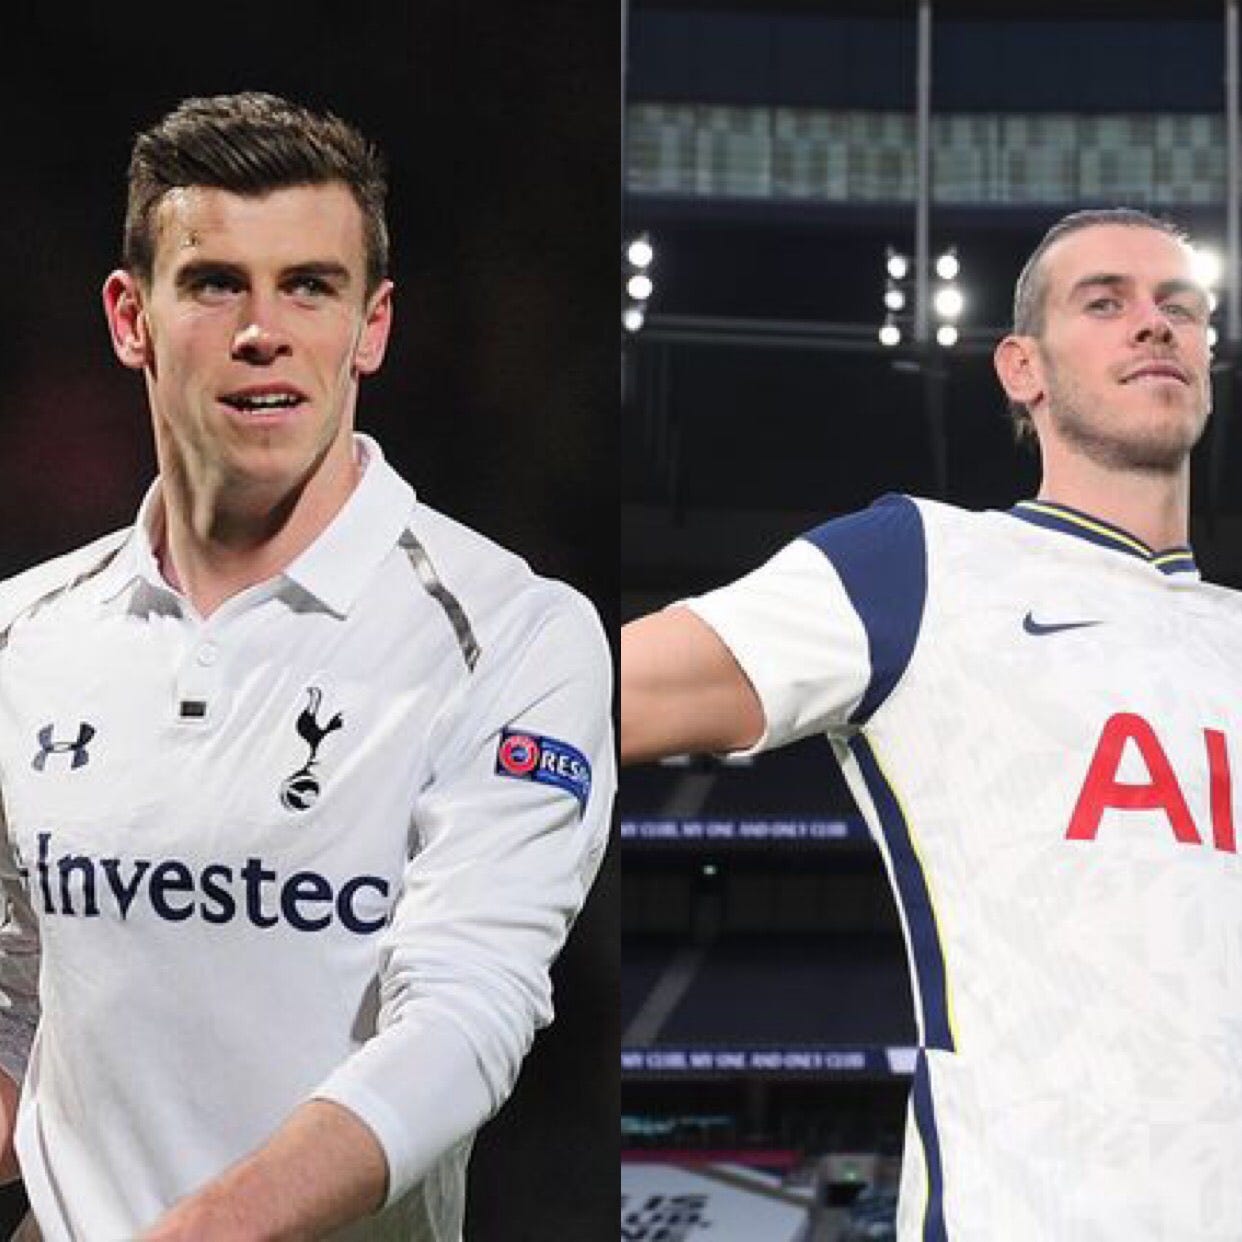 Ultimate Tottenham dream team - Kane and Bale in, no room for Son